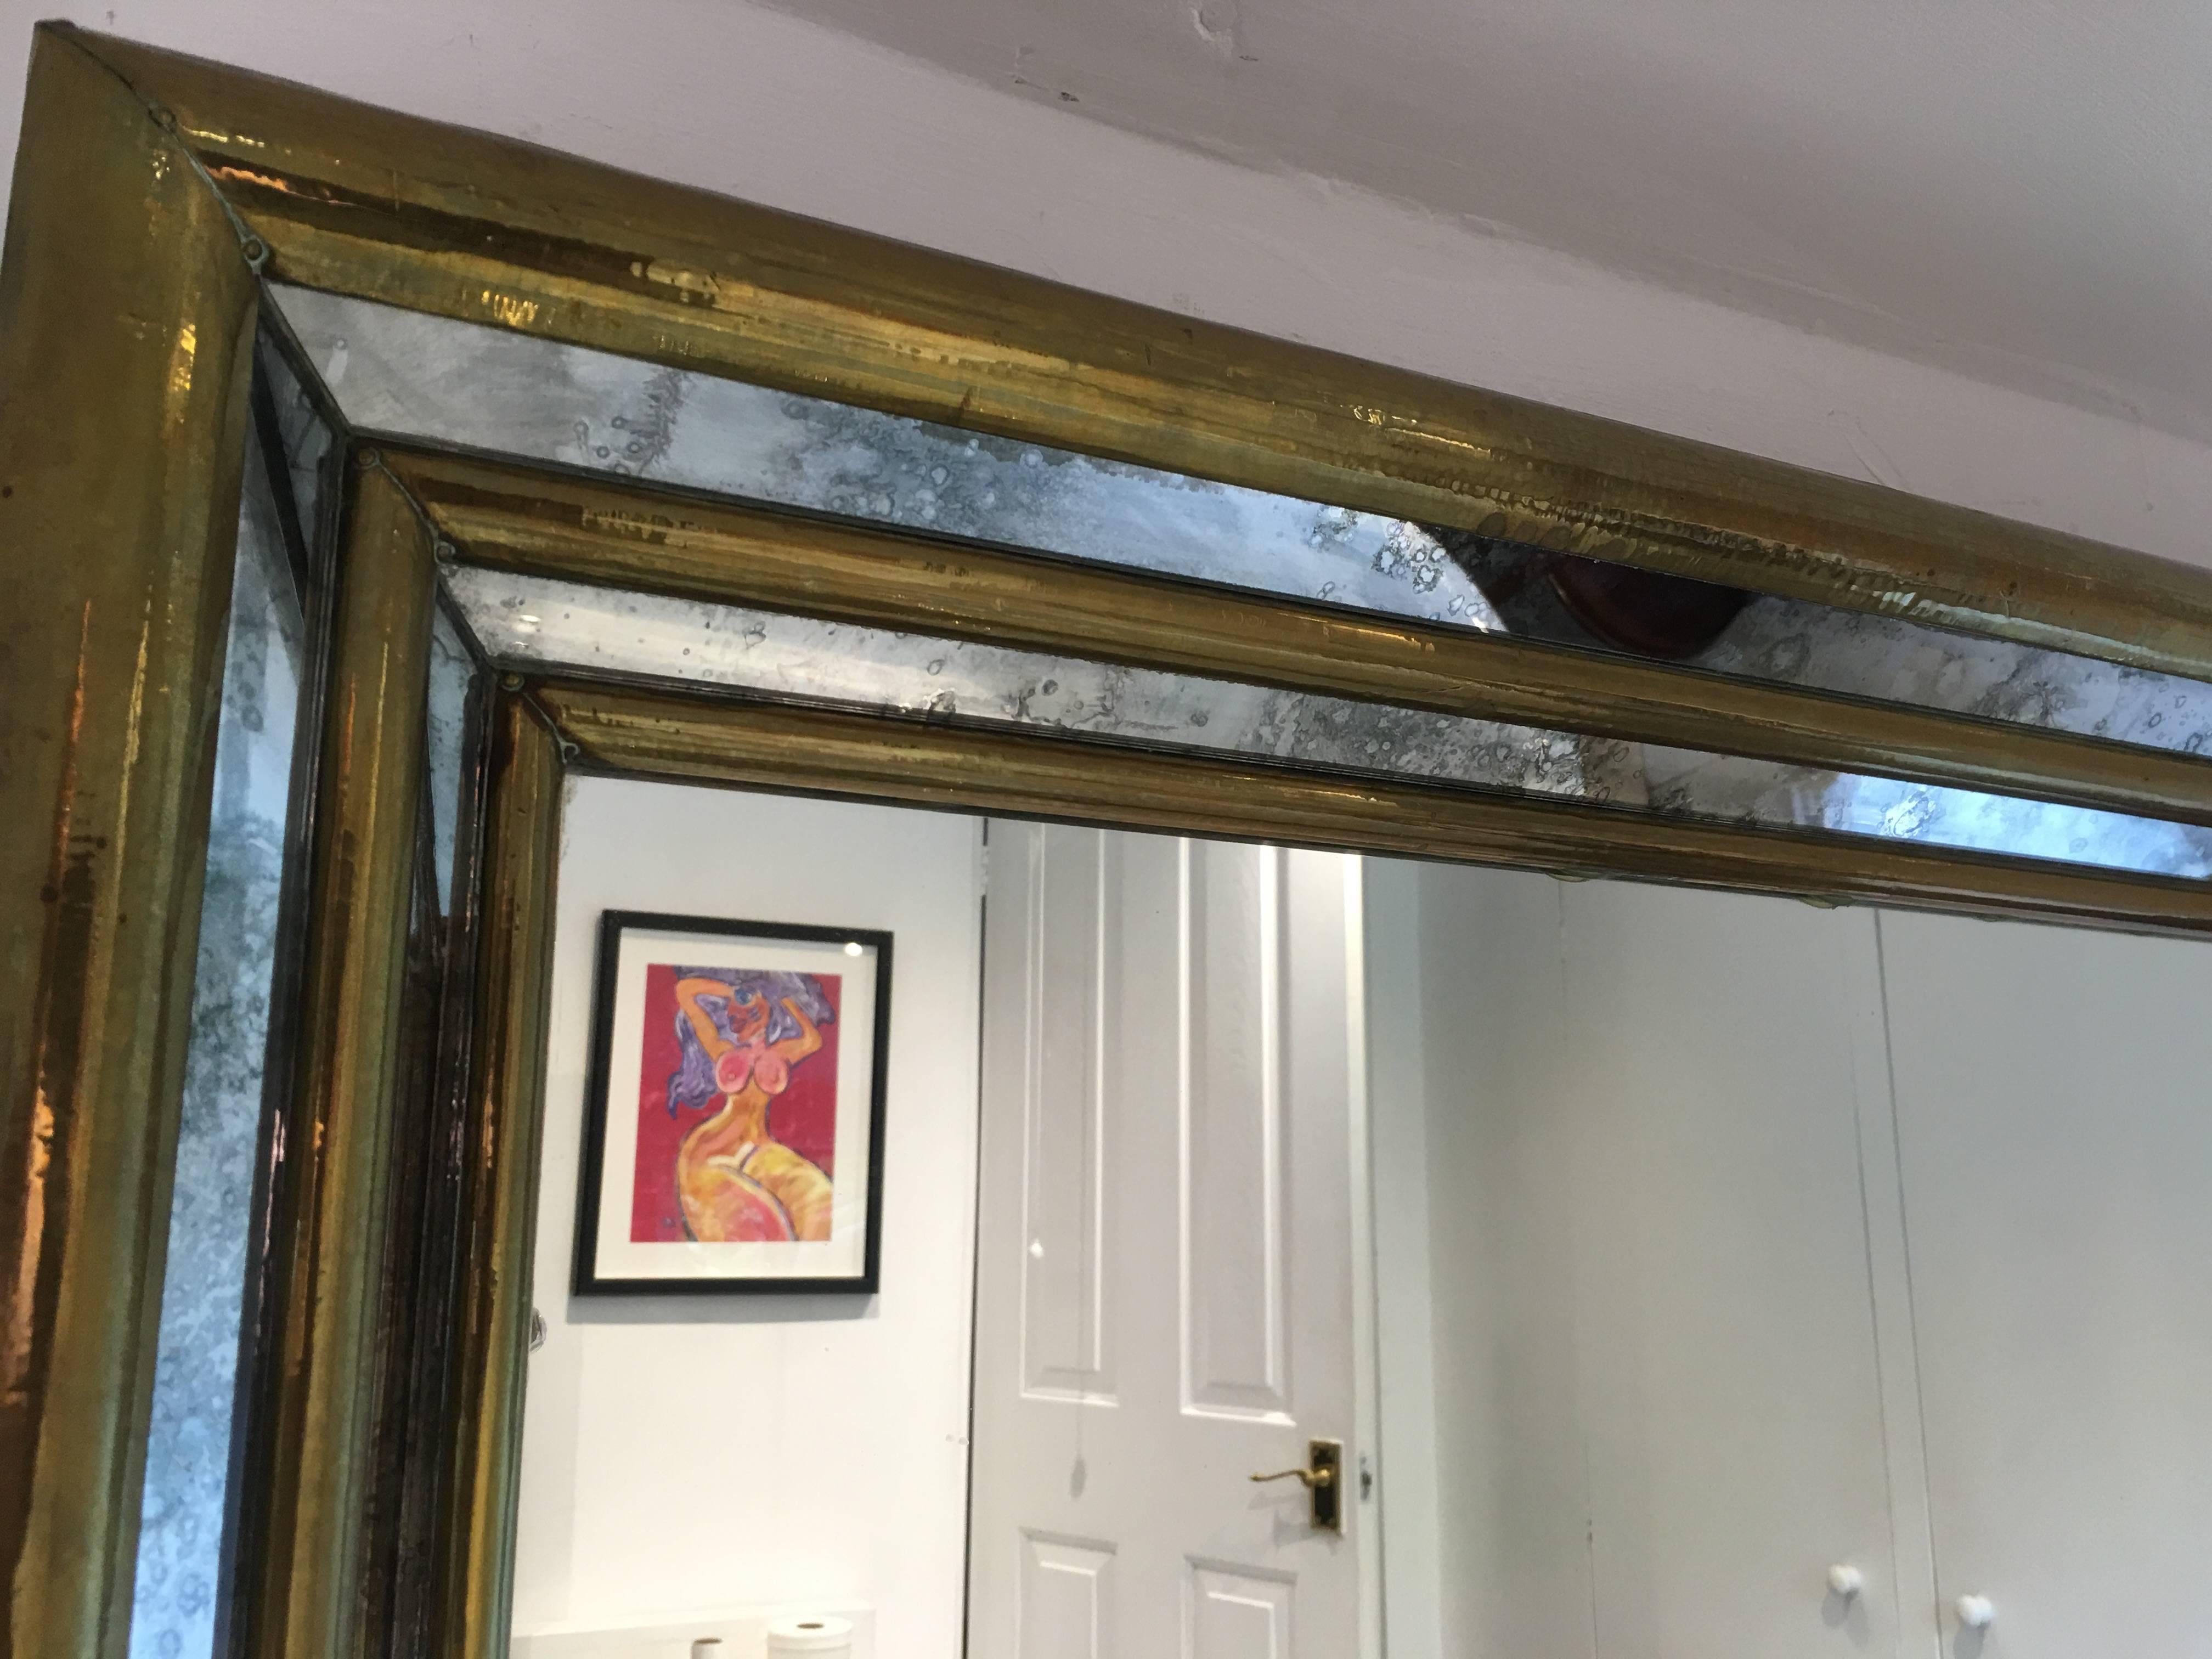 A superb stepped front mirror by Rodolfo Dubarry 

Hand-hammered brass cladding and with aged, smoked mirror glass

Beautifully signed in the bottom right hand corner and in wonderful condition

Spanish, circa 1970s.